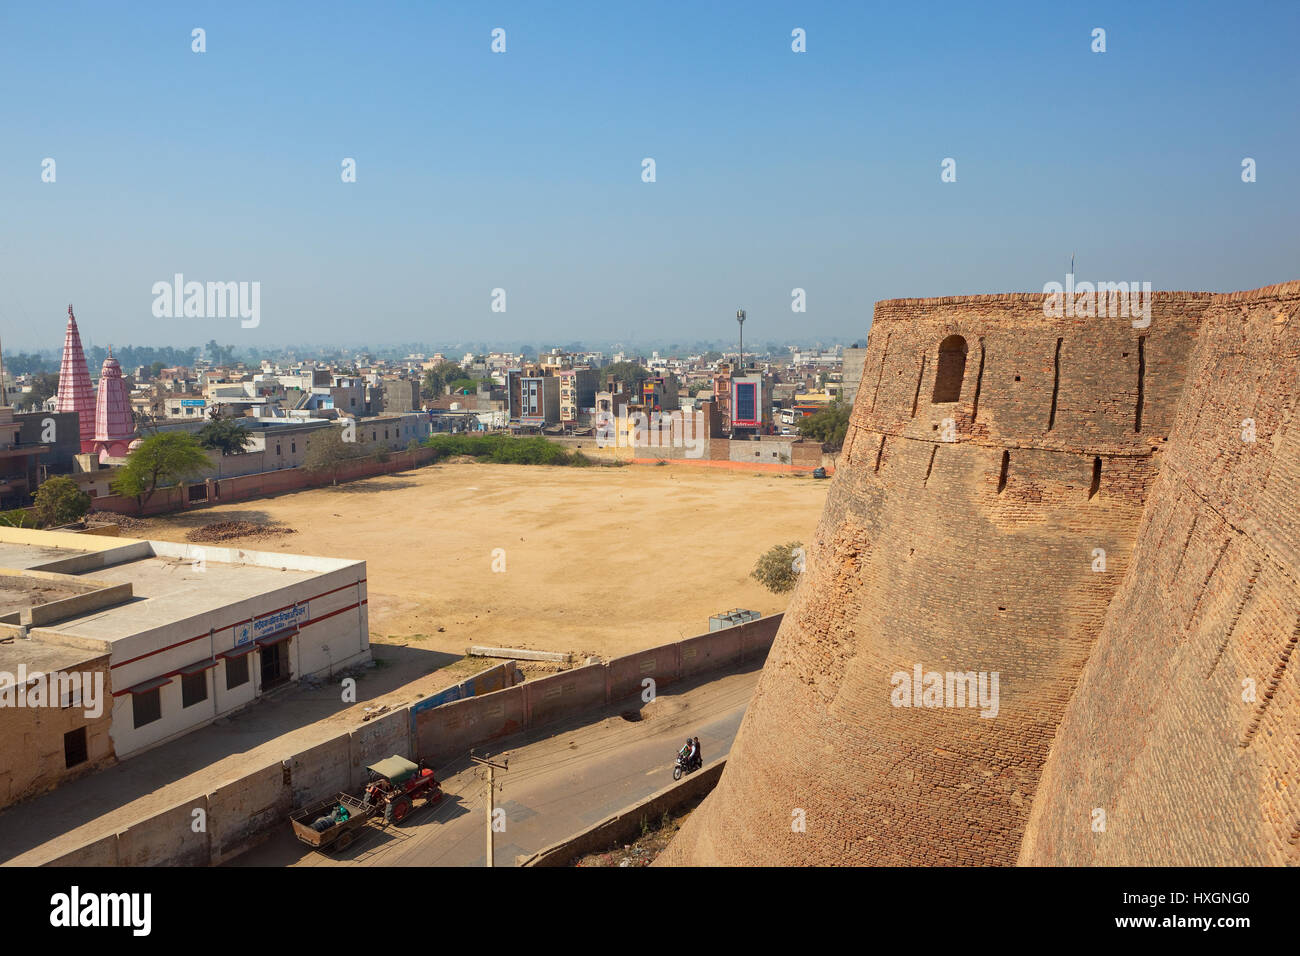 a view of hanumangarh city in rajasthan india with hindu temple and the side of bhatner fort walls under a blue sky Stock Photo